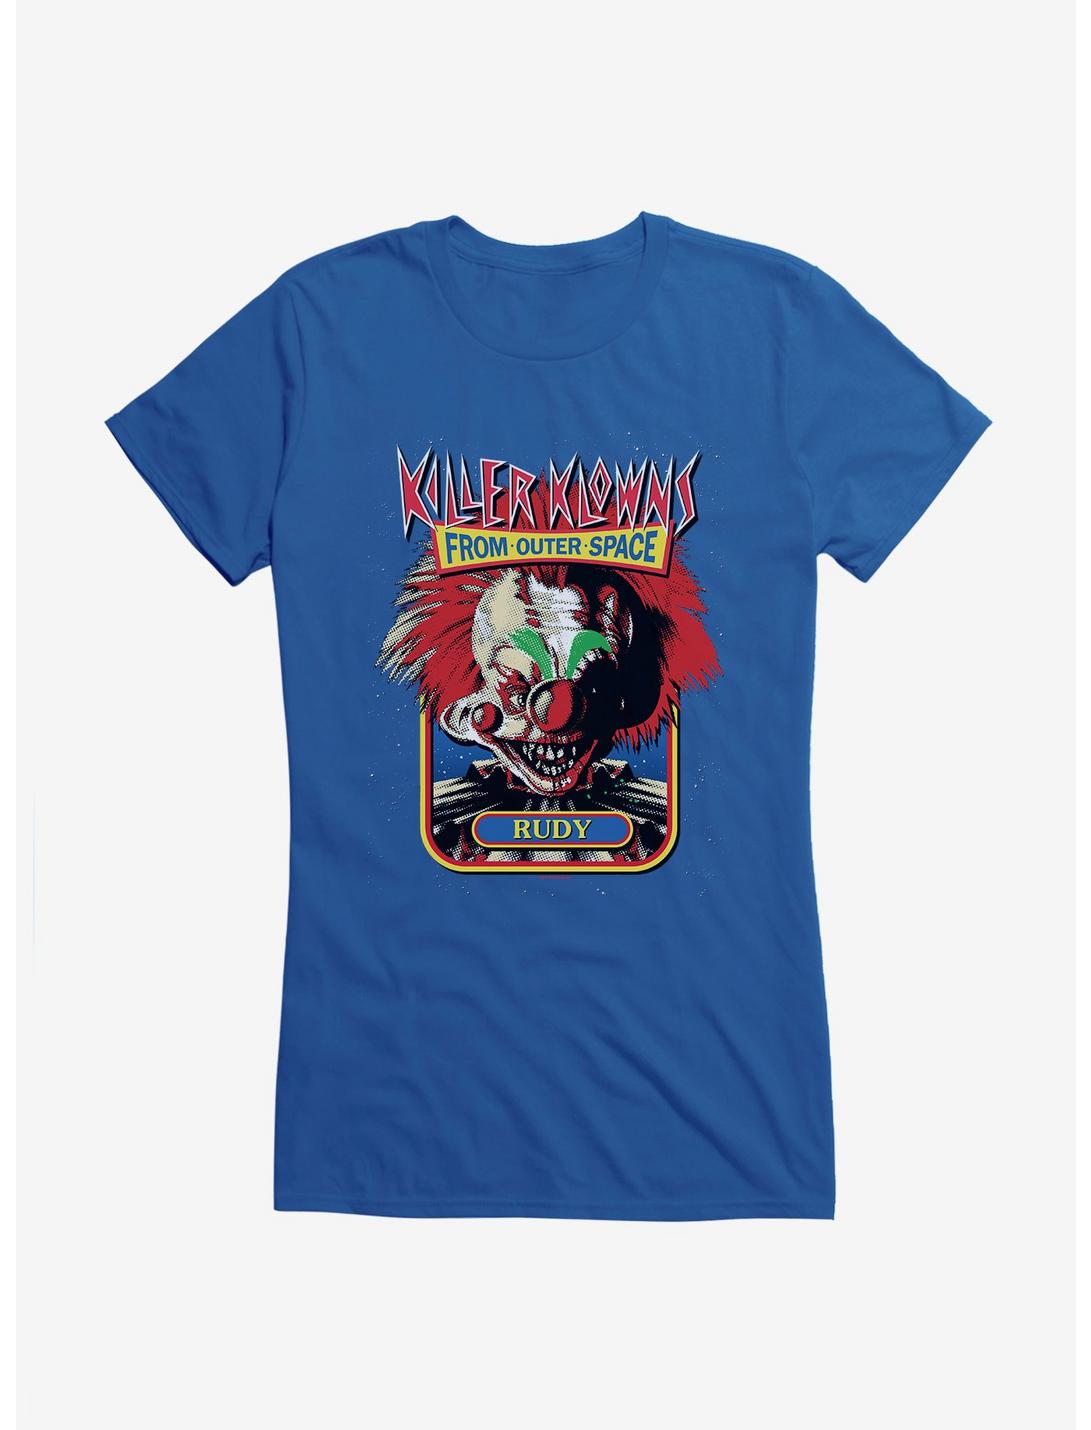 Killer Klowns From Outer Space Rudy Girls T-Shirt, , hi-res